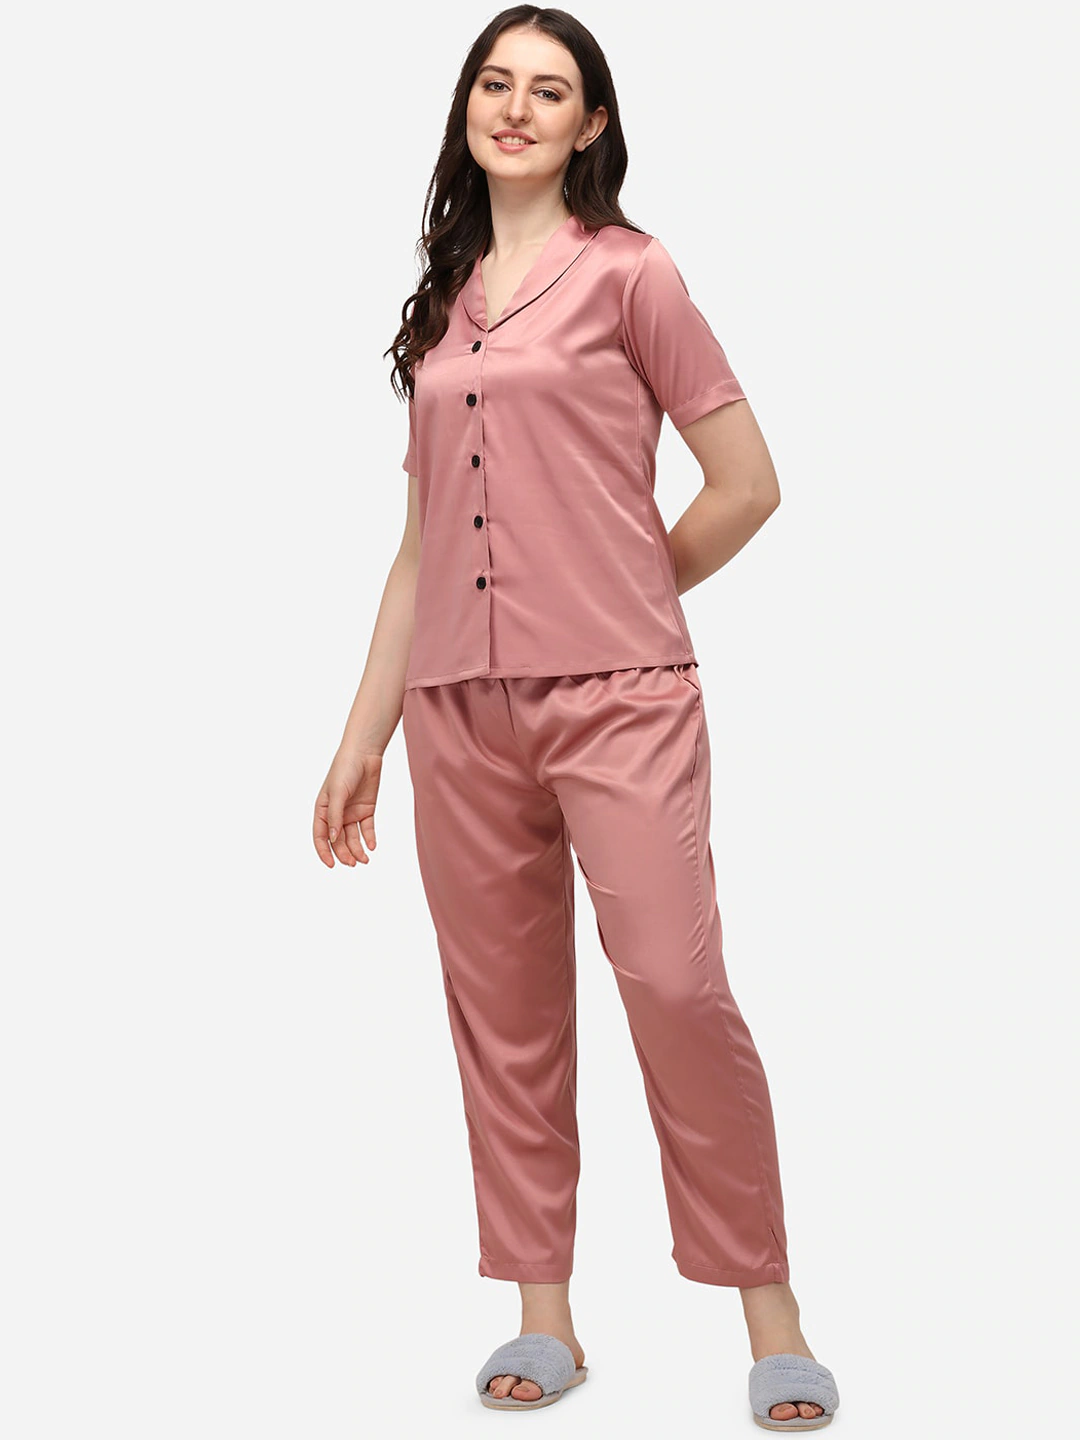 Hot Sexy Trouser Shirt Sleep Wear Night Suit For Women And Girls Complete  Night Suit For Ladies Nighty - Black